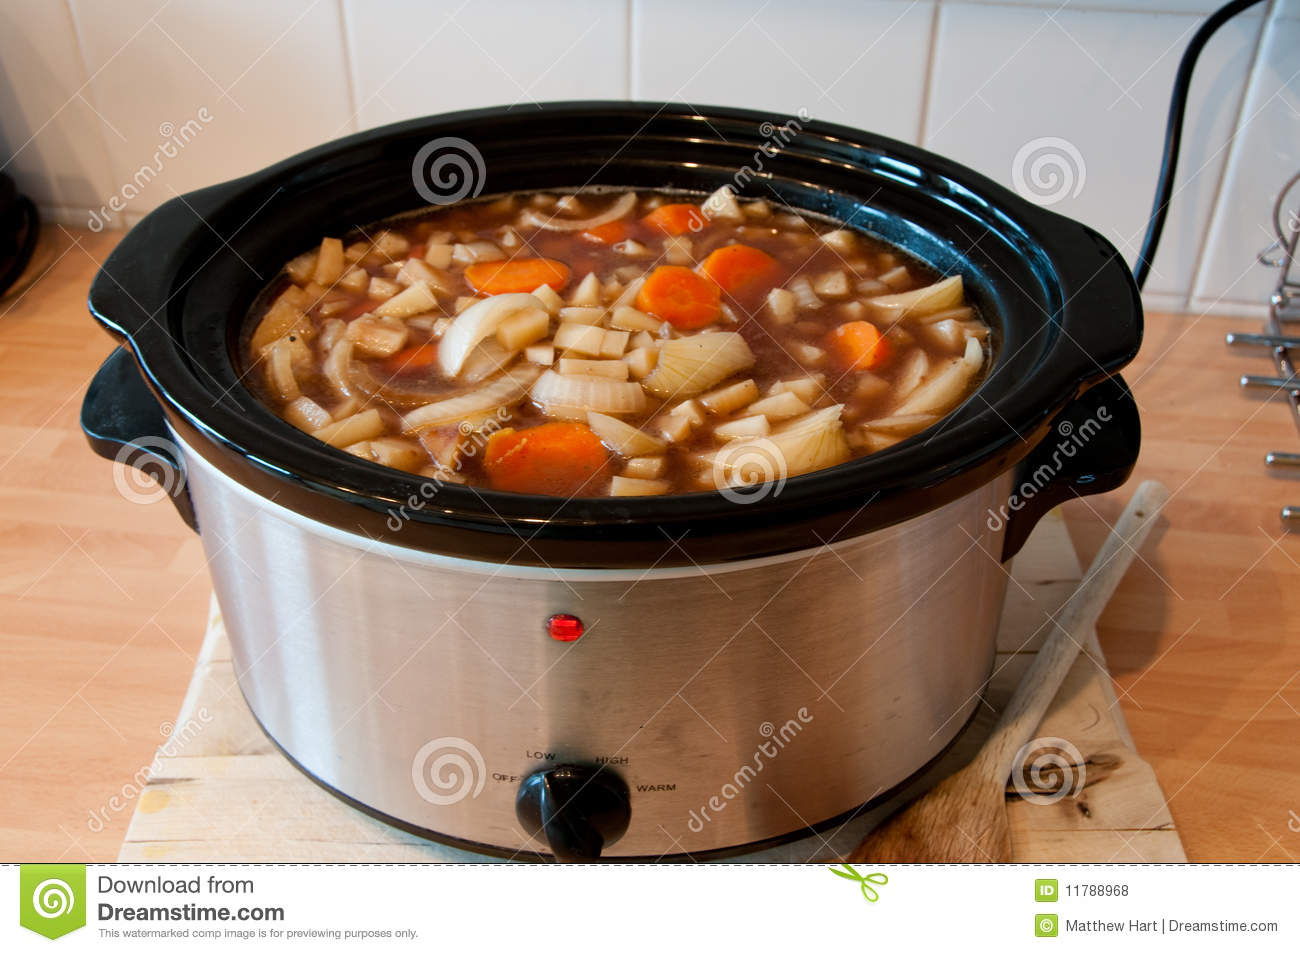 Slow Cooker With Scouse Cooking Standing On A Wooden Board With A